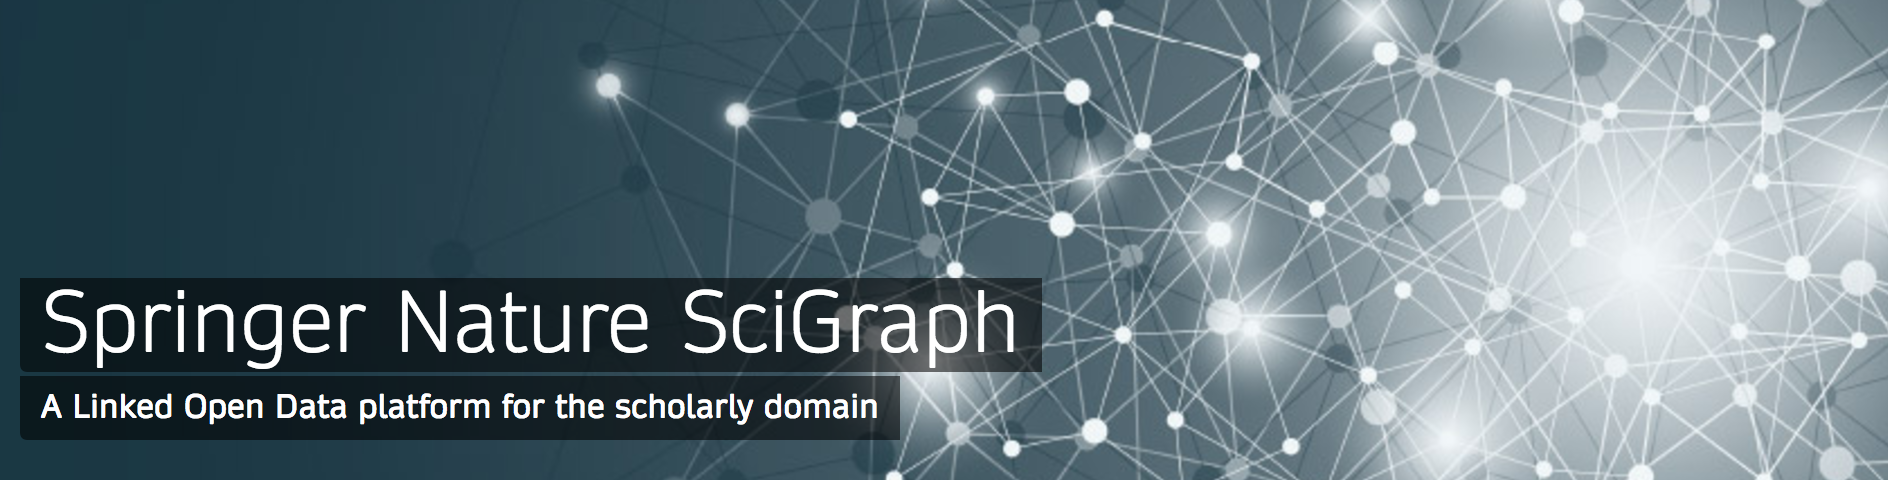 scigraph.png